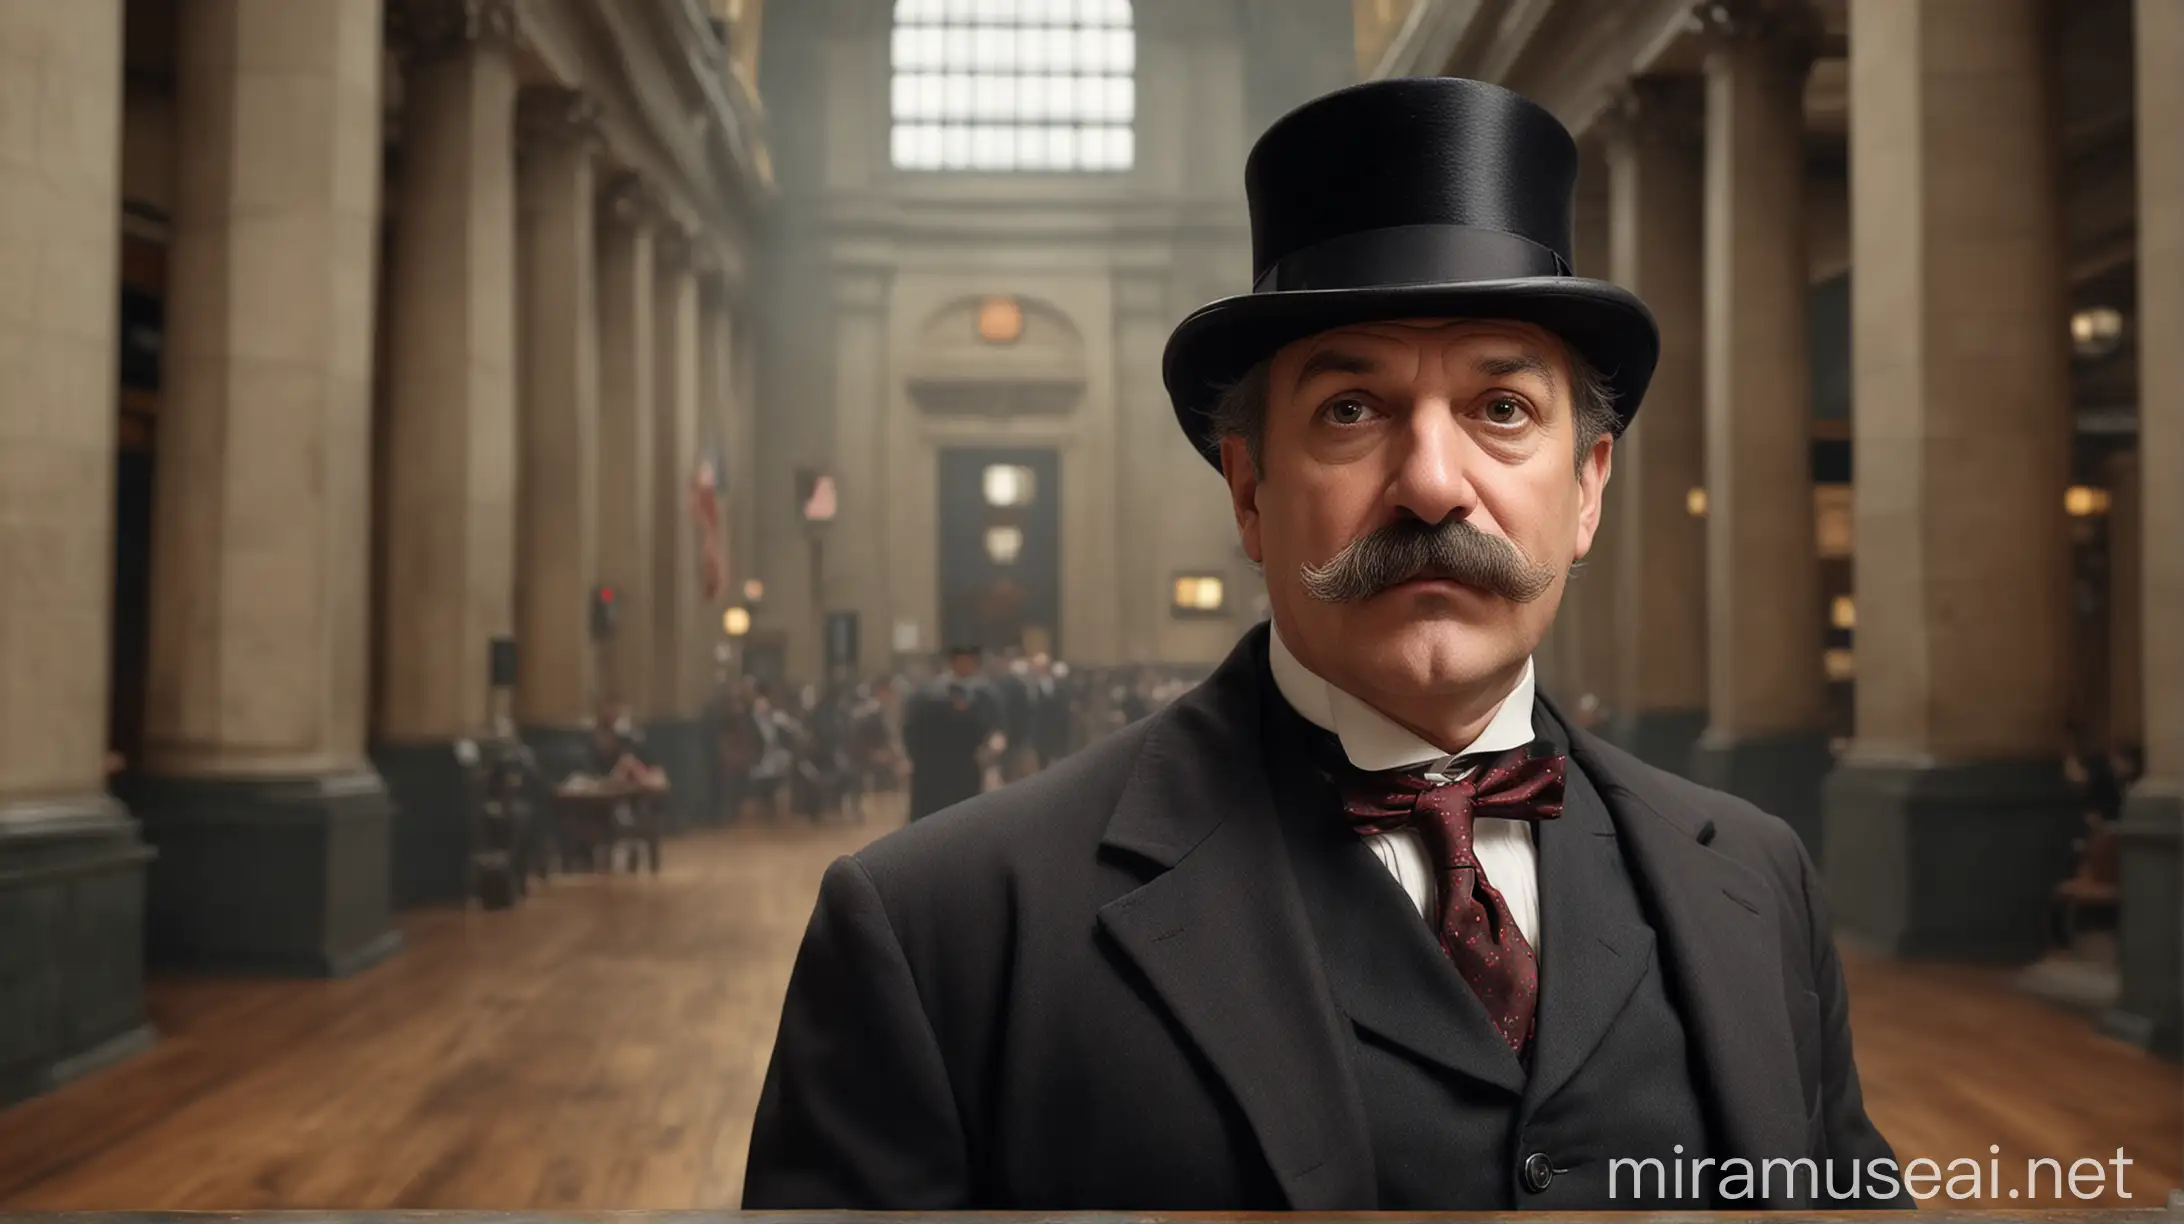 create a cinematic hyperrealistic image of a 1920's banker with a handlebar moustache and a top hat standing on the floor of the new york stock exchange. He is 60 years old, slightly overweight with grey facial hair.  He looks confident and at the height of his powers.  He has a stren expression on his face.